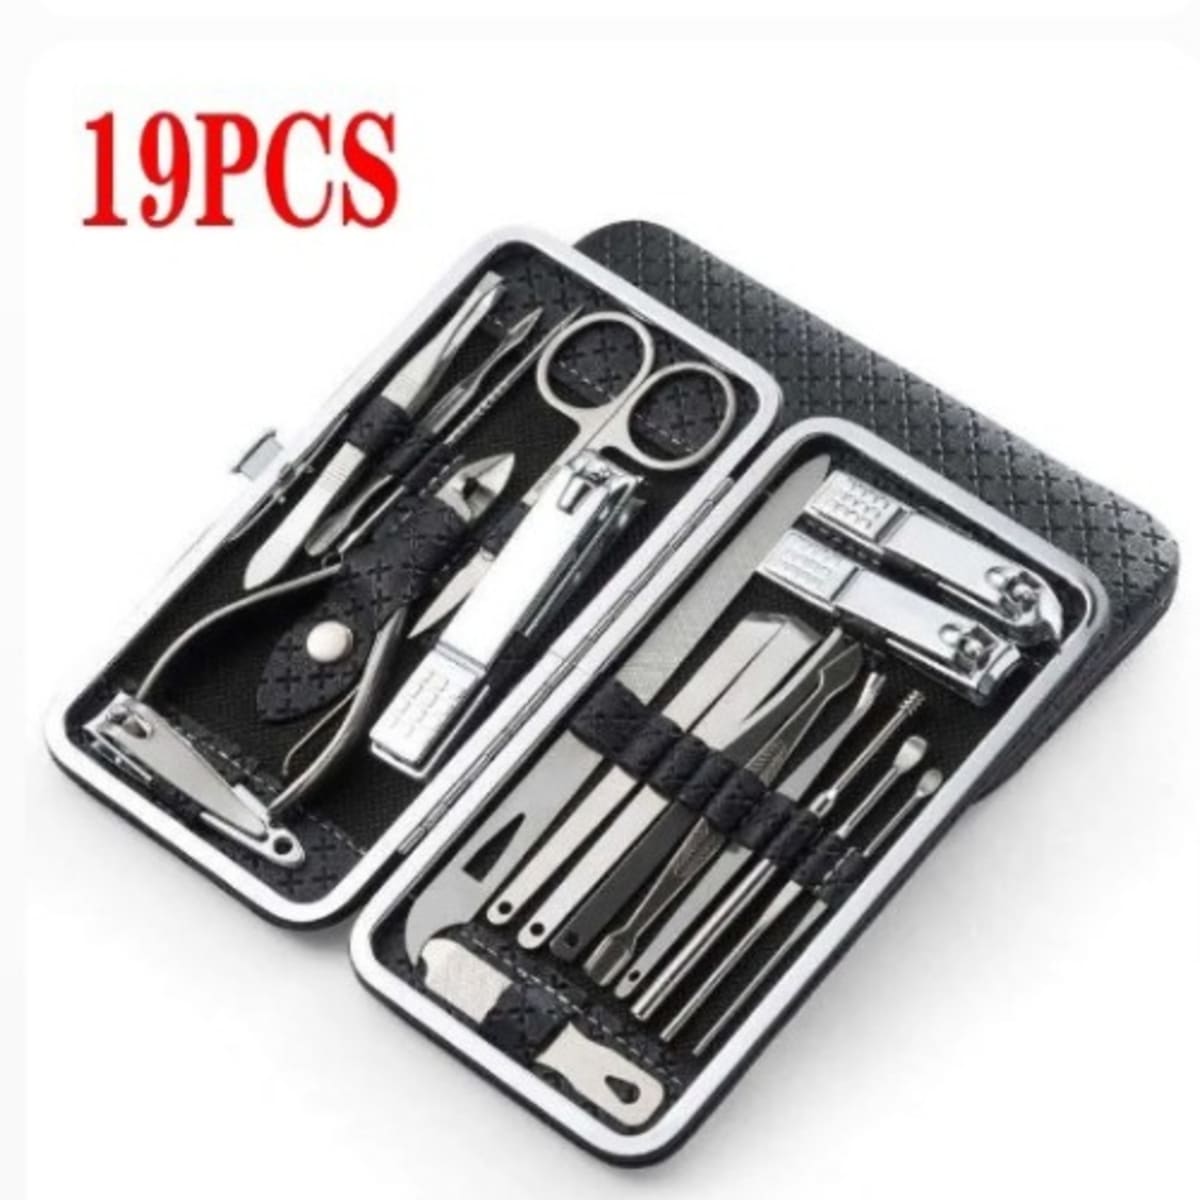 Aceoce Manicure Set Personal Care Nail Clipper Kit Manicure India | Ubuy